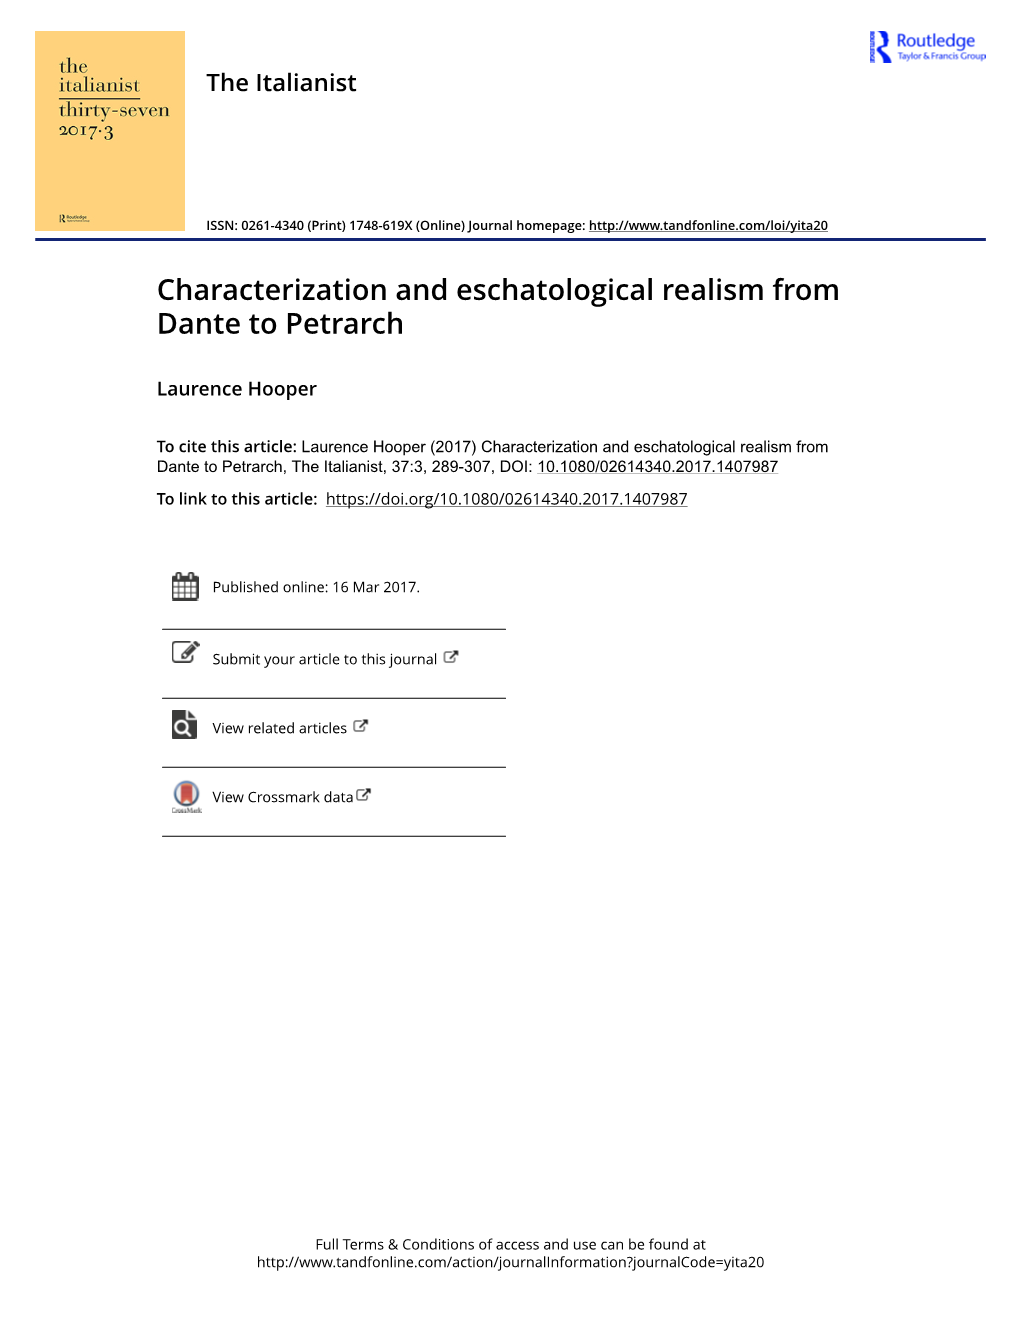 Characterization and Eschatological Realism from Dante to Petrarch